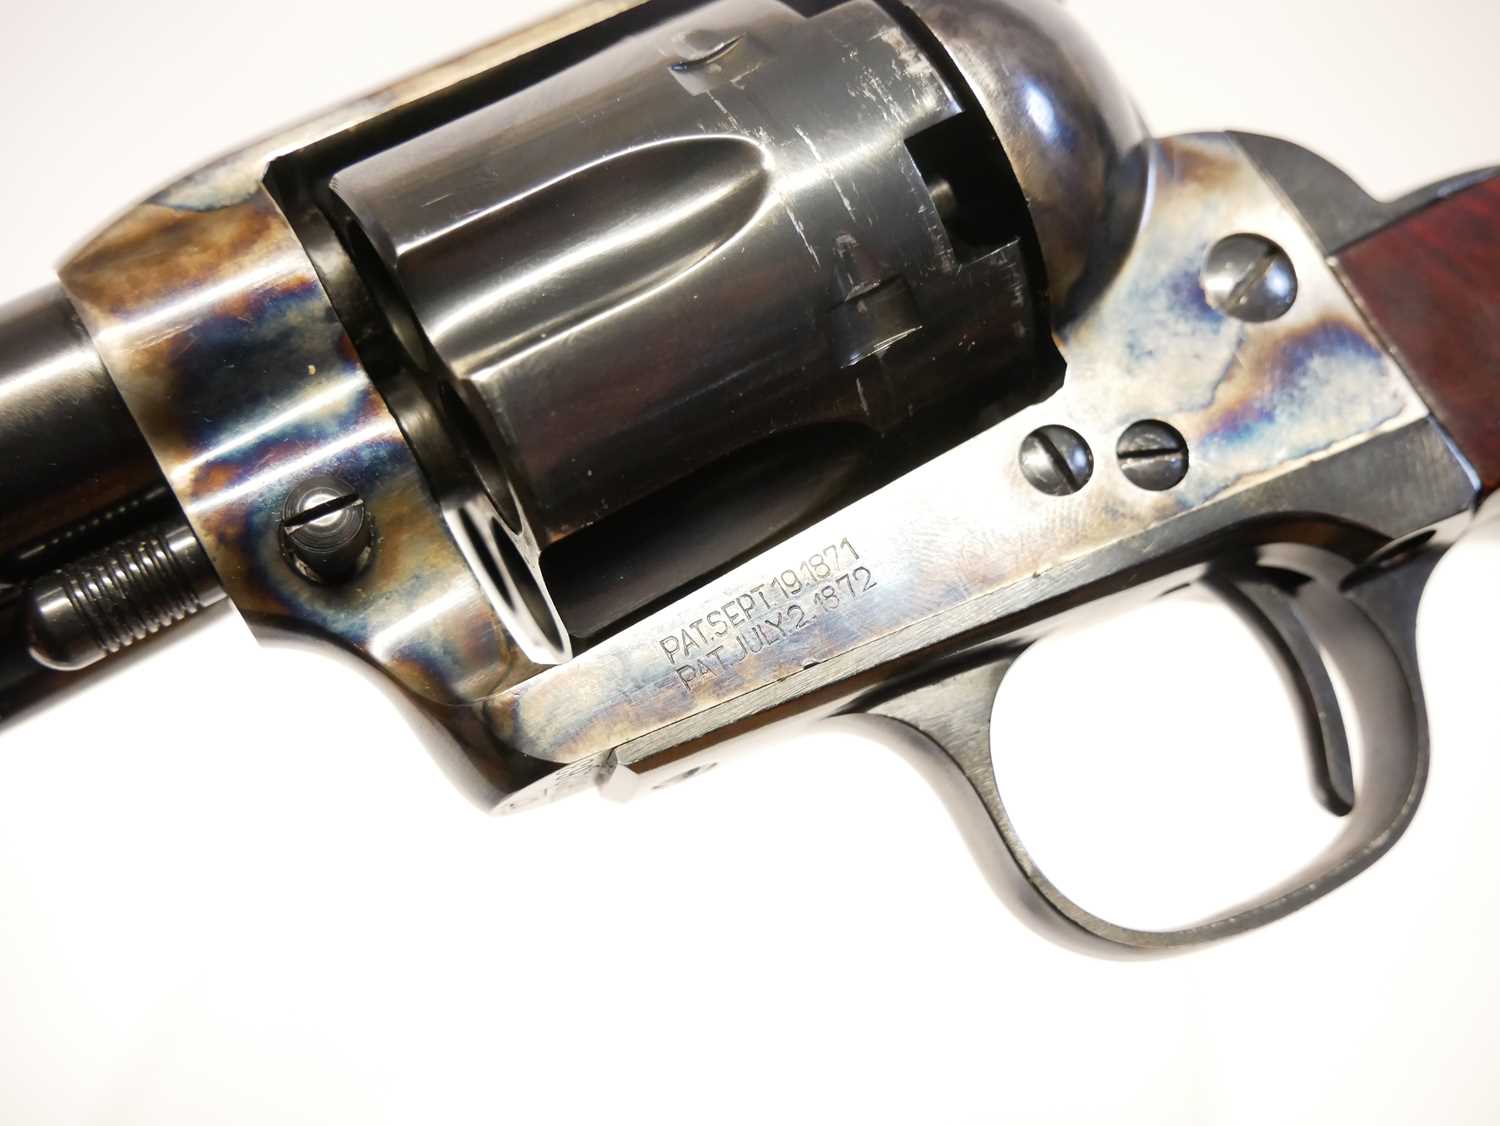 Uberti .44 percussion muzzle loading cattleman revolver, serial number UG0263, 7.5inch barrel, - Image 9 of 10